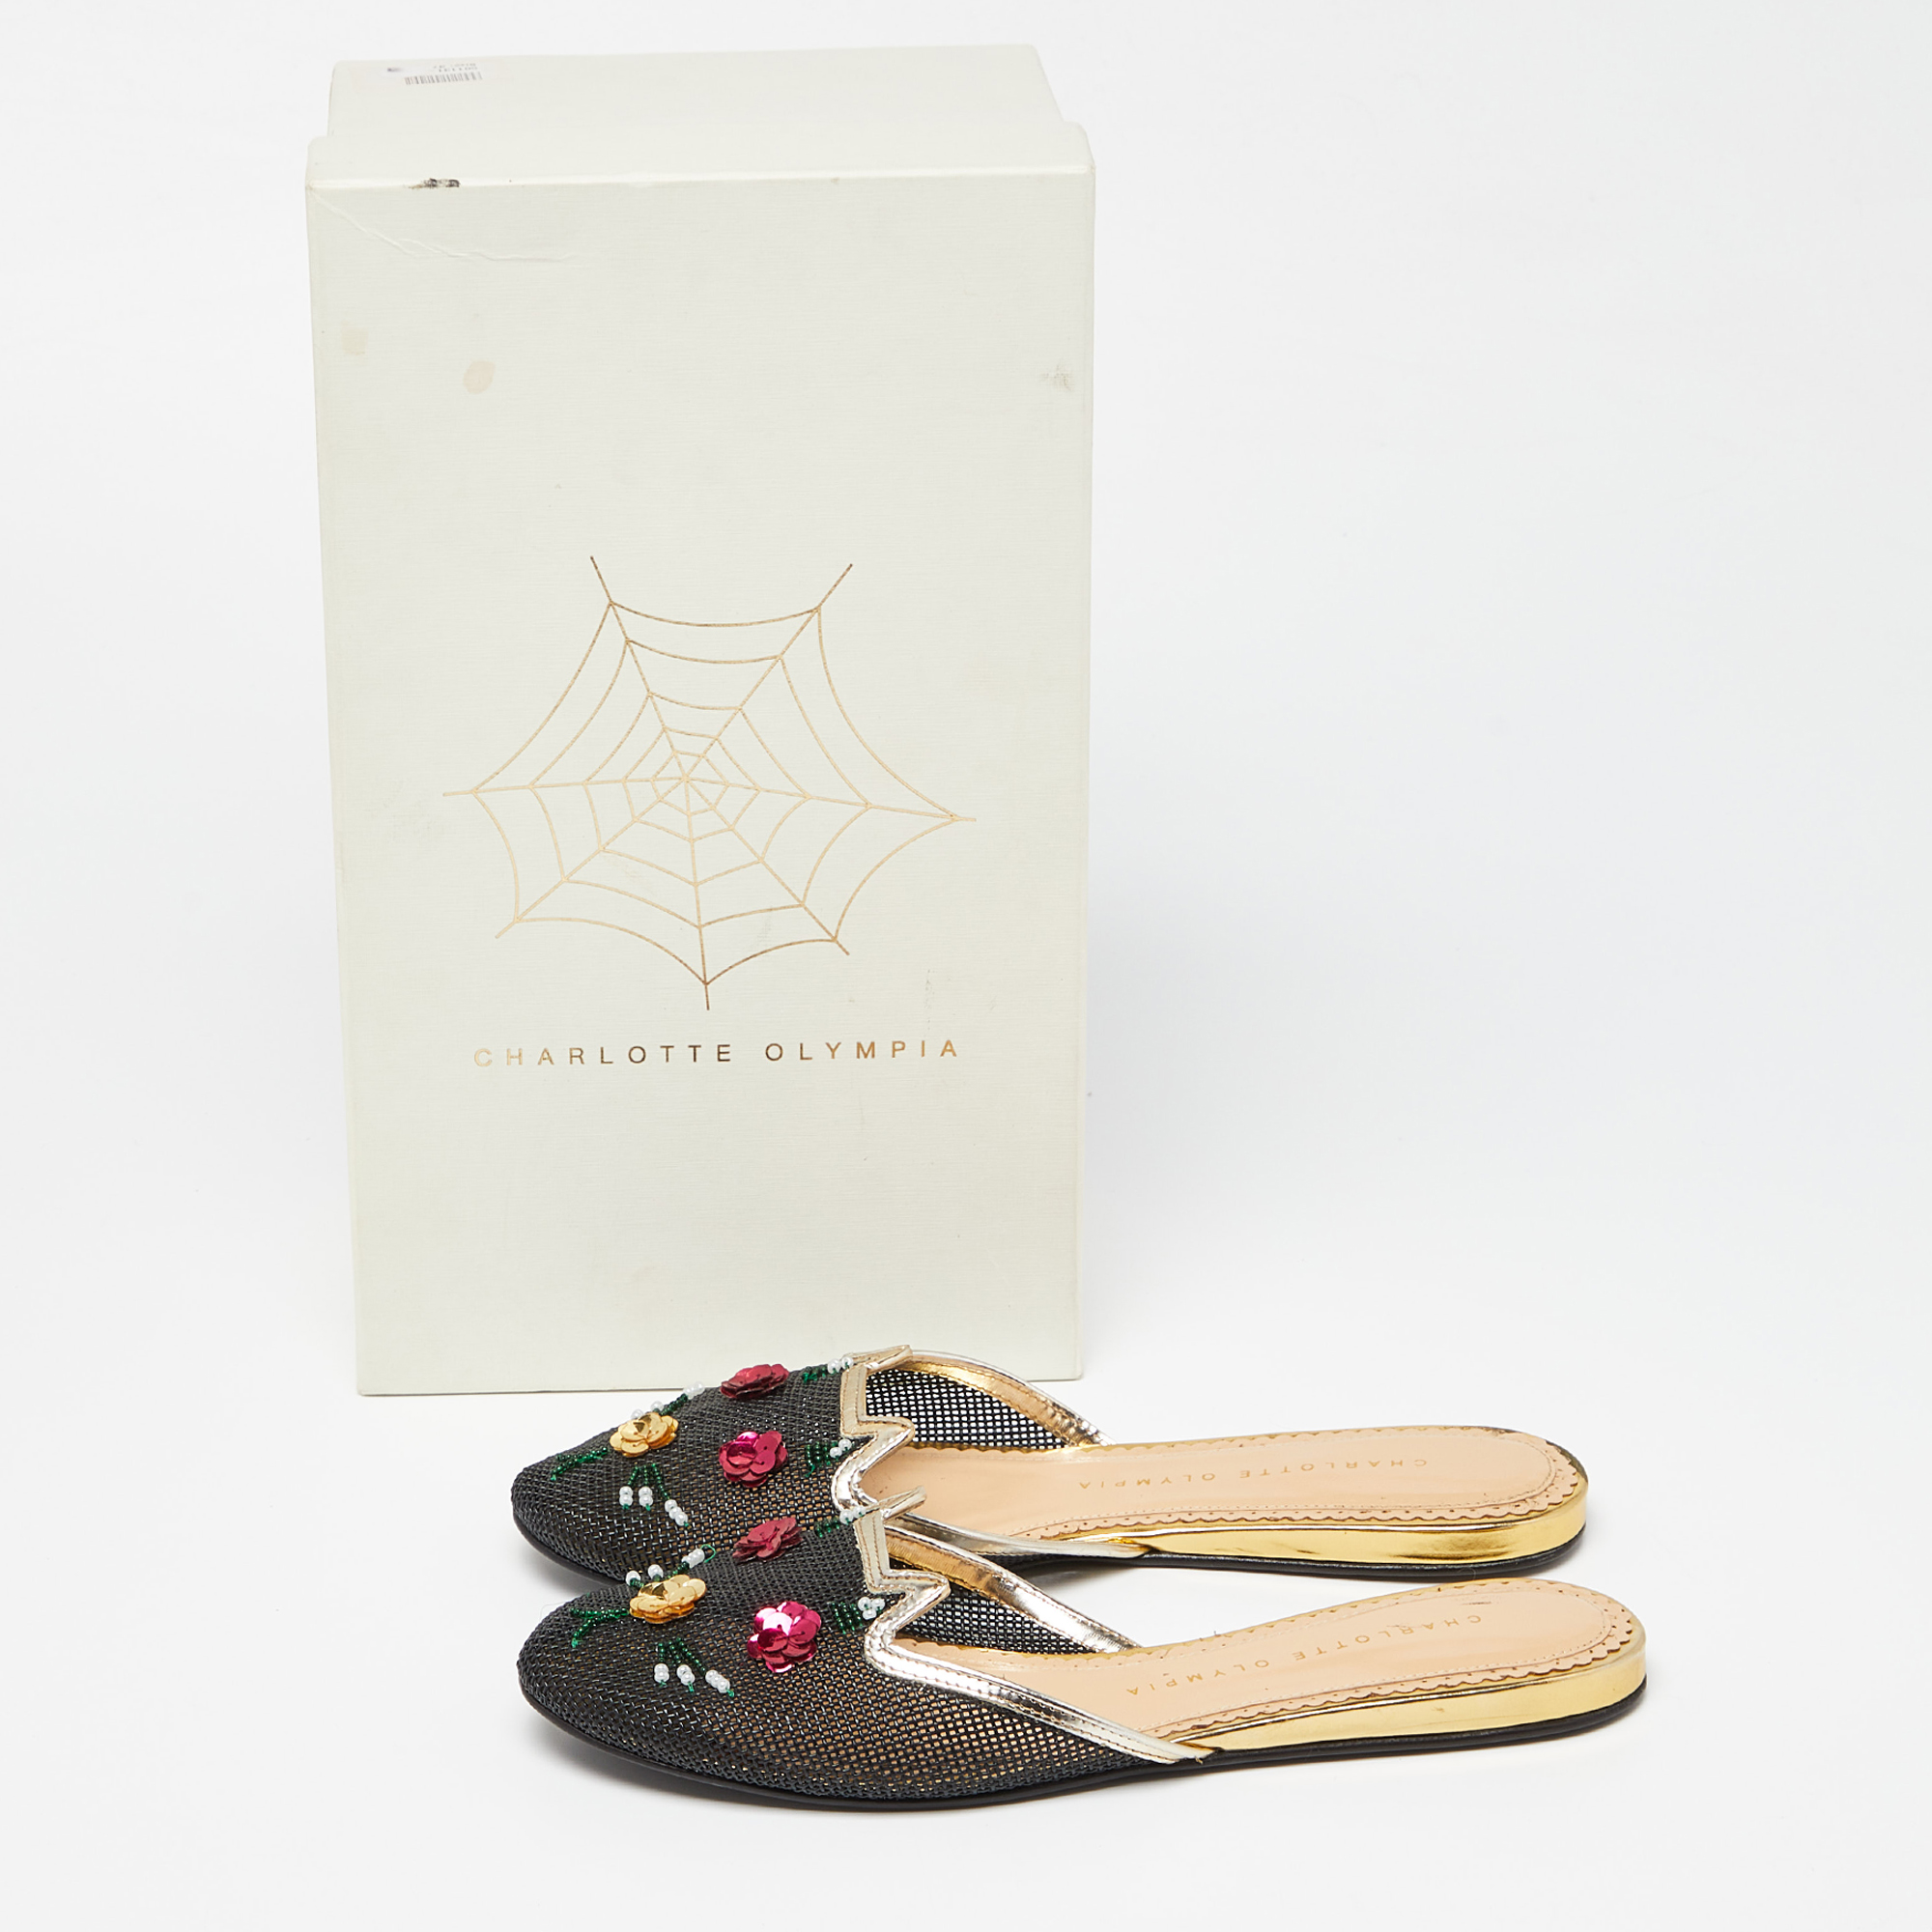 Charlotte Olympia Black/Gold Mesh And Patent Leather Kitsch Kitty Sequin Flat Slides Size 37